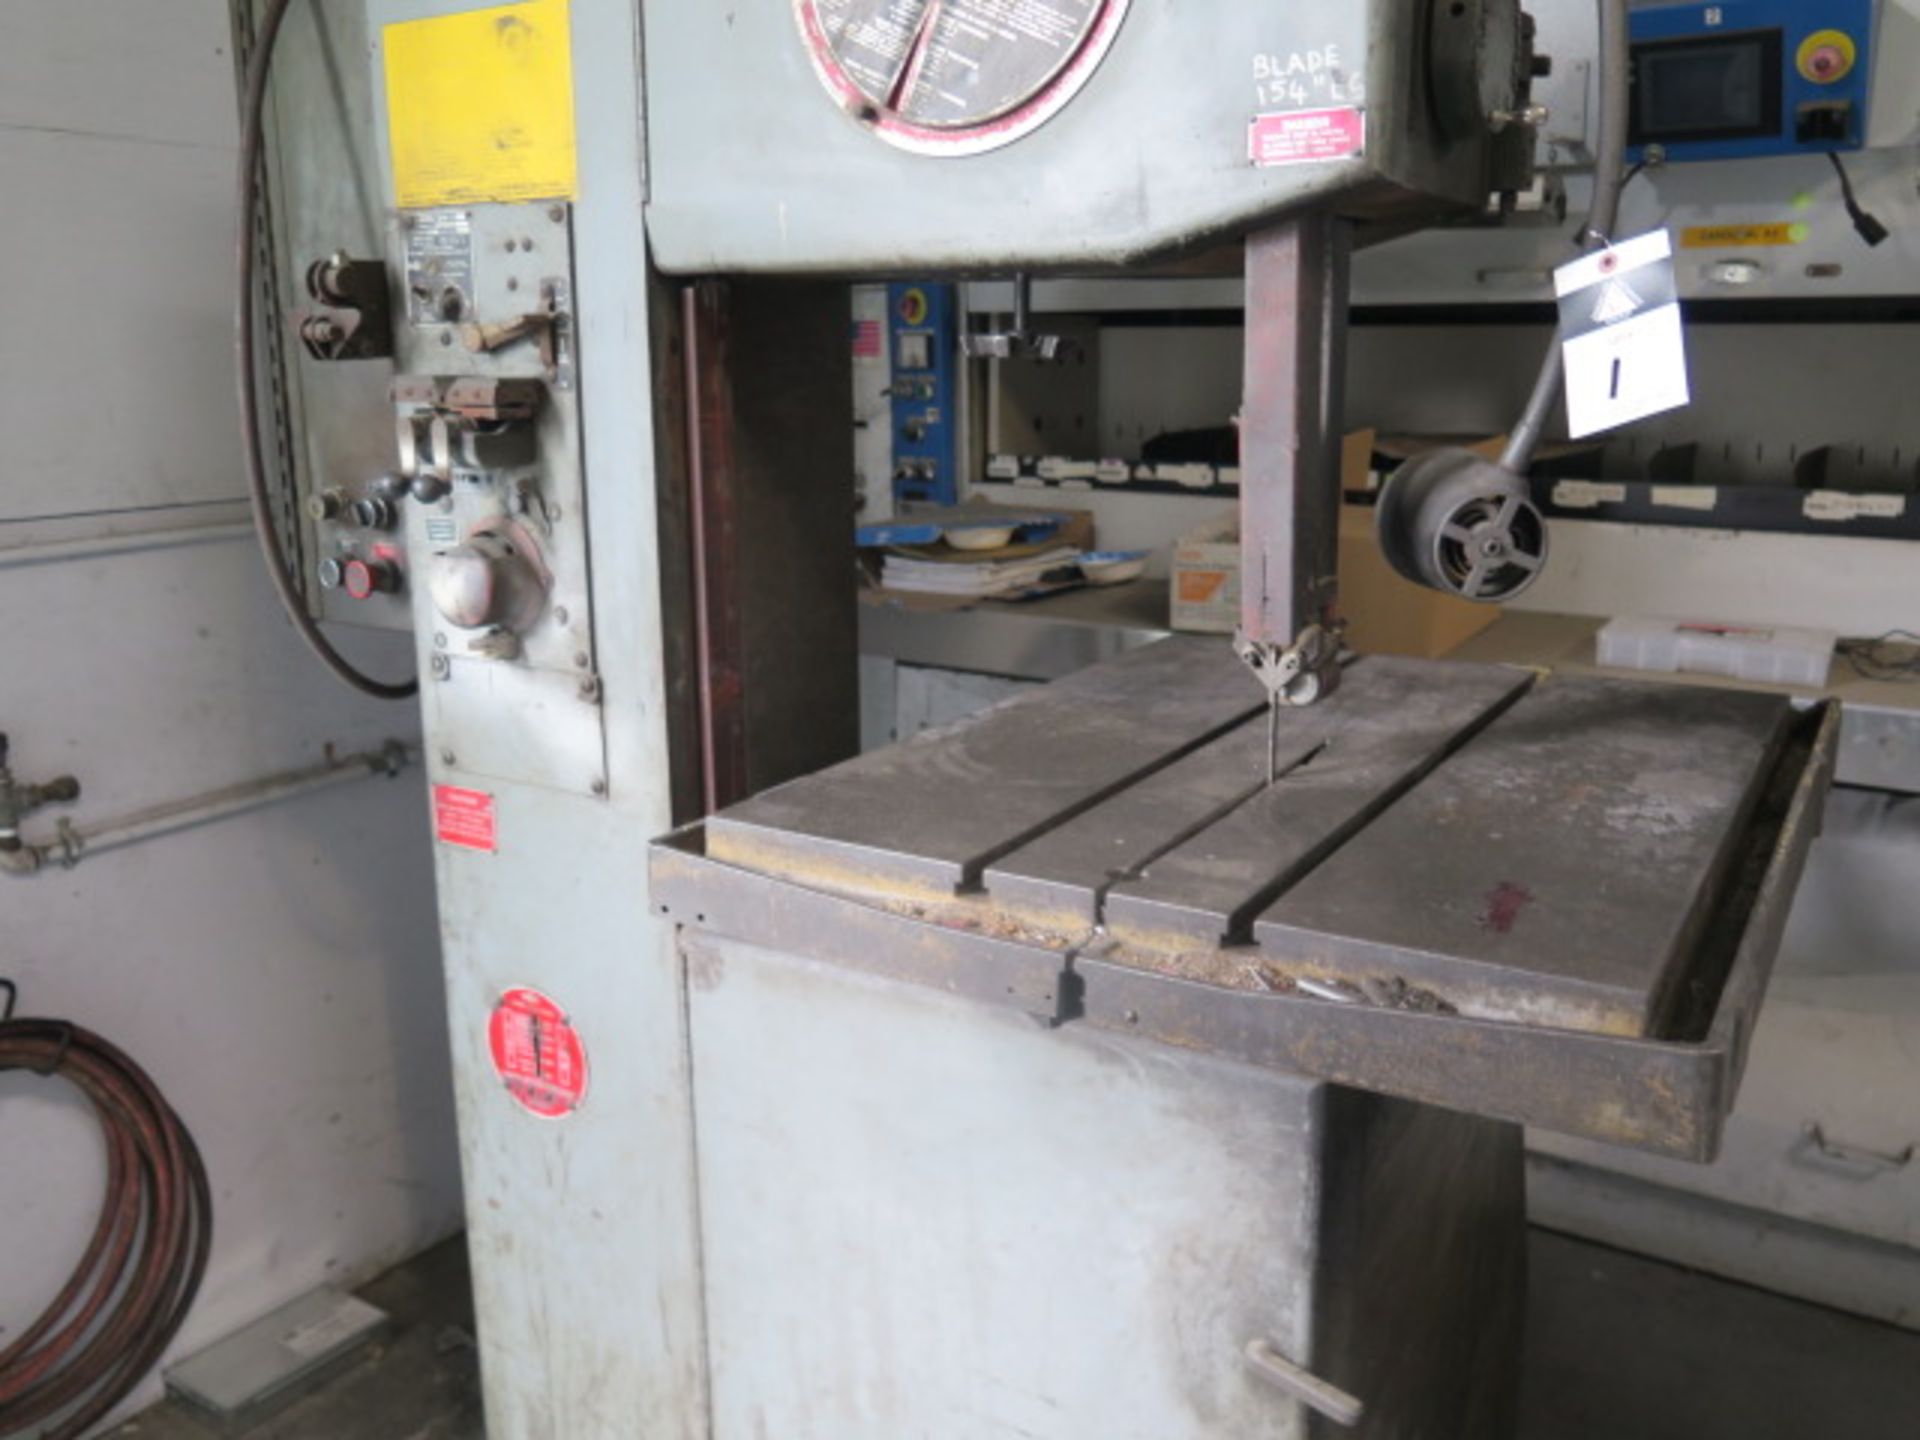 DoAll 2012-1A 20” Vertical Band Saw s/n 340-78413 w/ Blade Welder, 50-5200 FPM, SOLD AS IS - Image 4 of 8